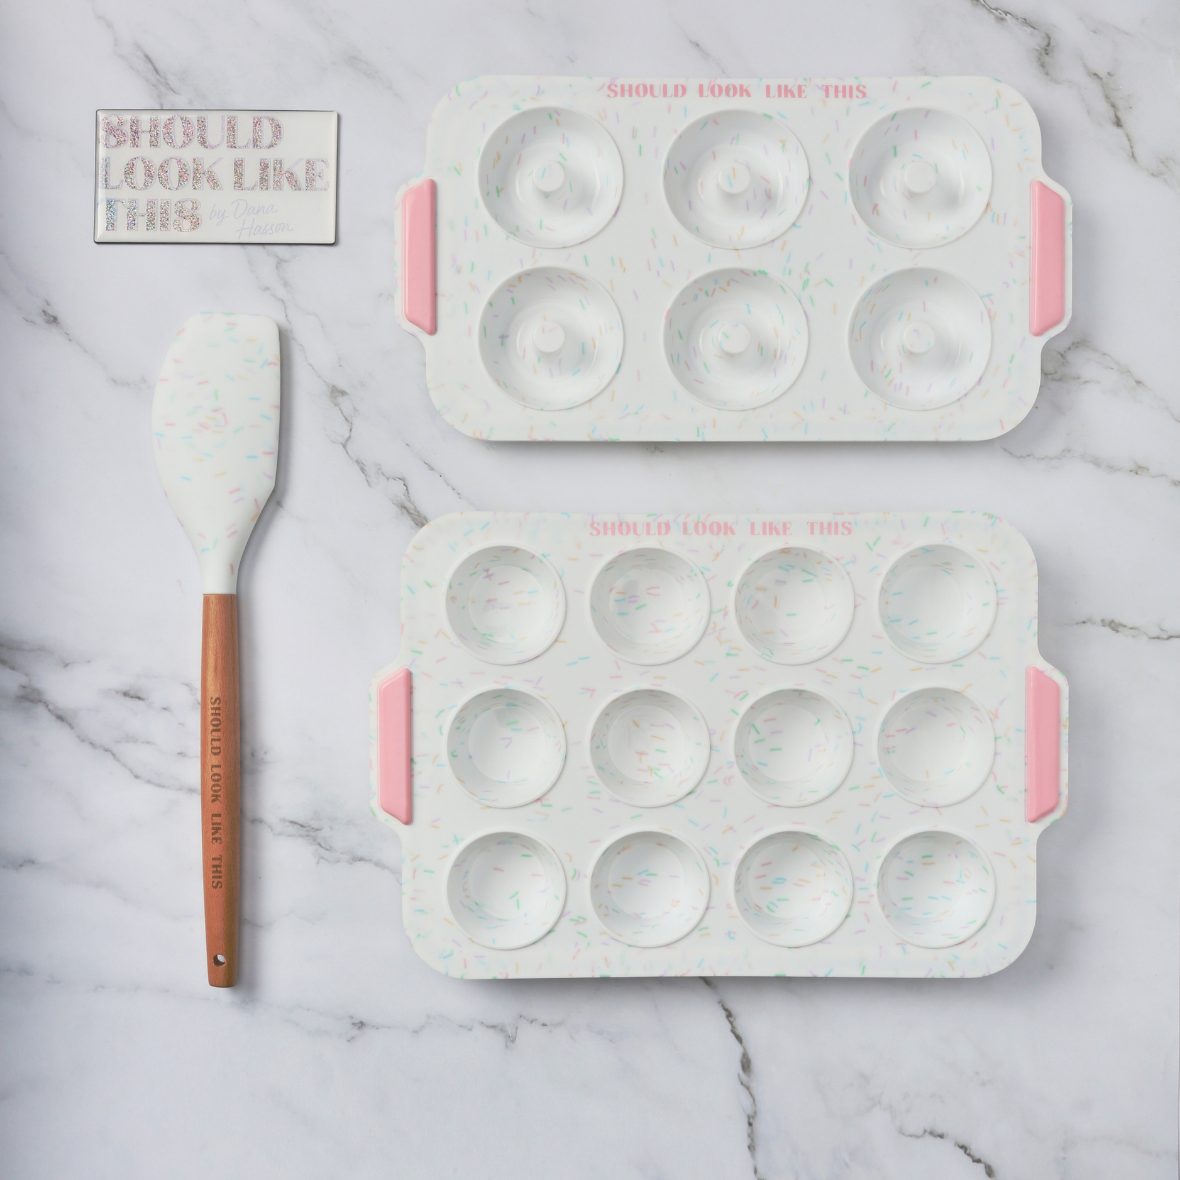 should look like this branded magnet, spatula, donut pan, mini muffin pan displayed with marble background